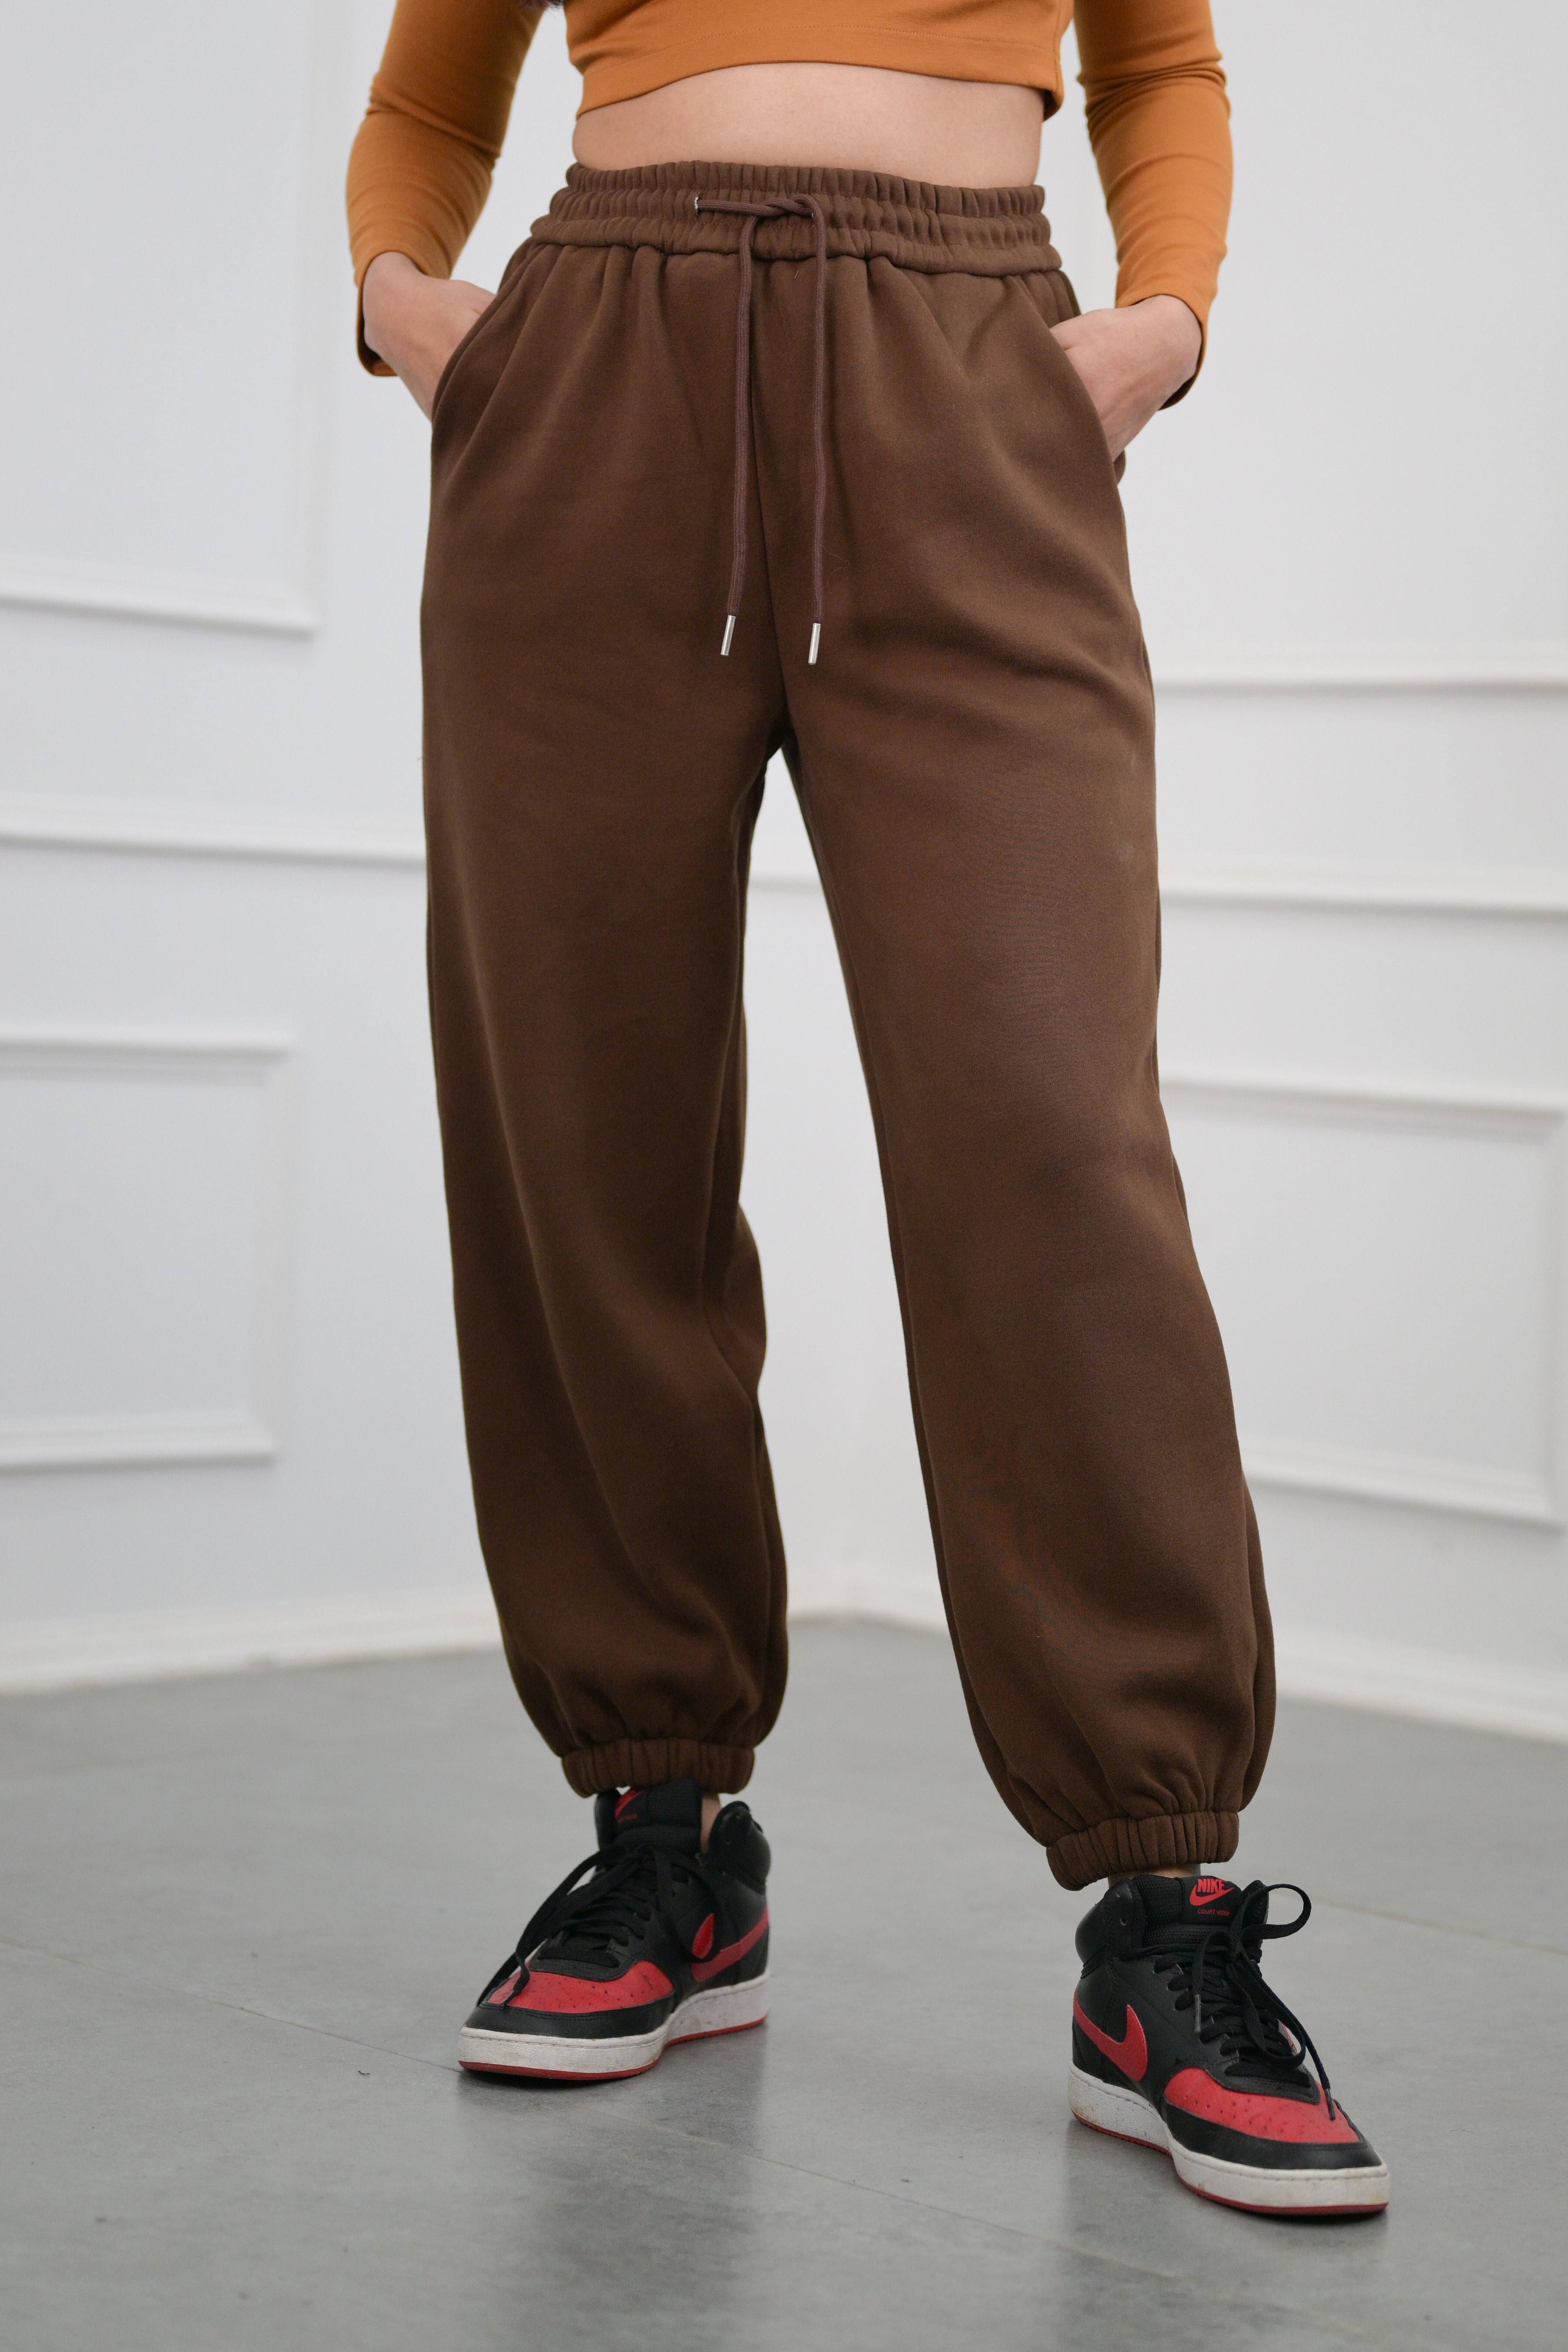 H&M Dark Brown Sweatpants Size XS - $20 - From bell